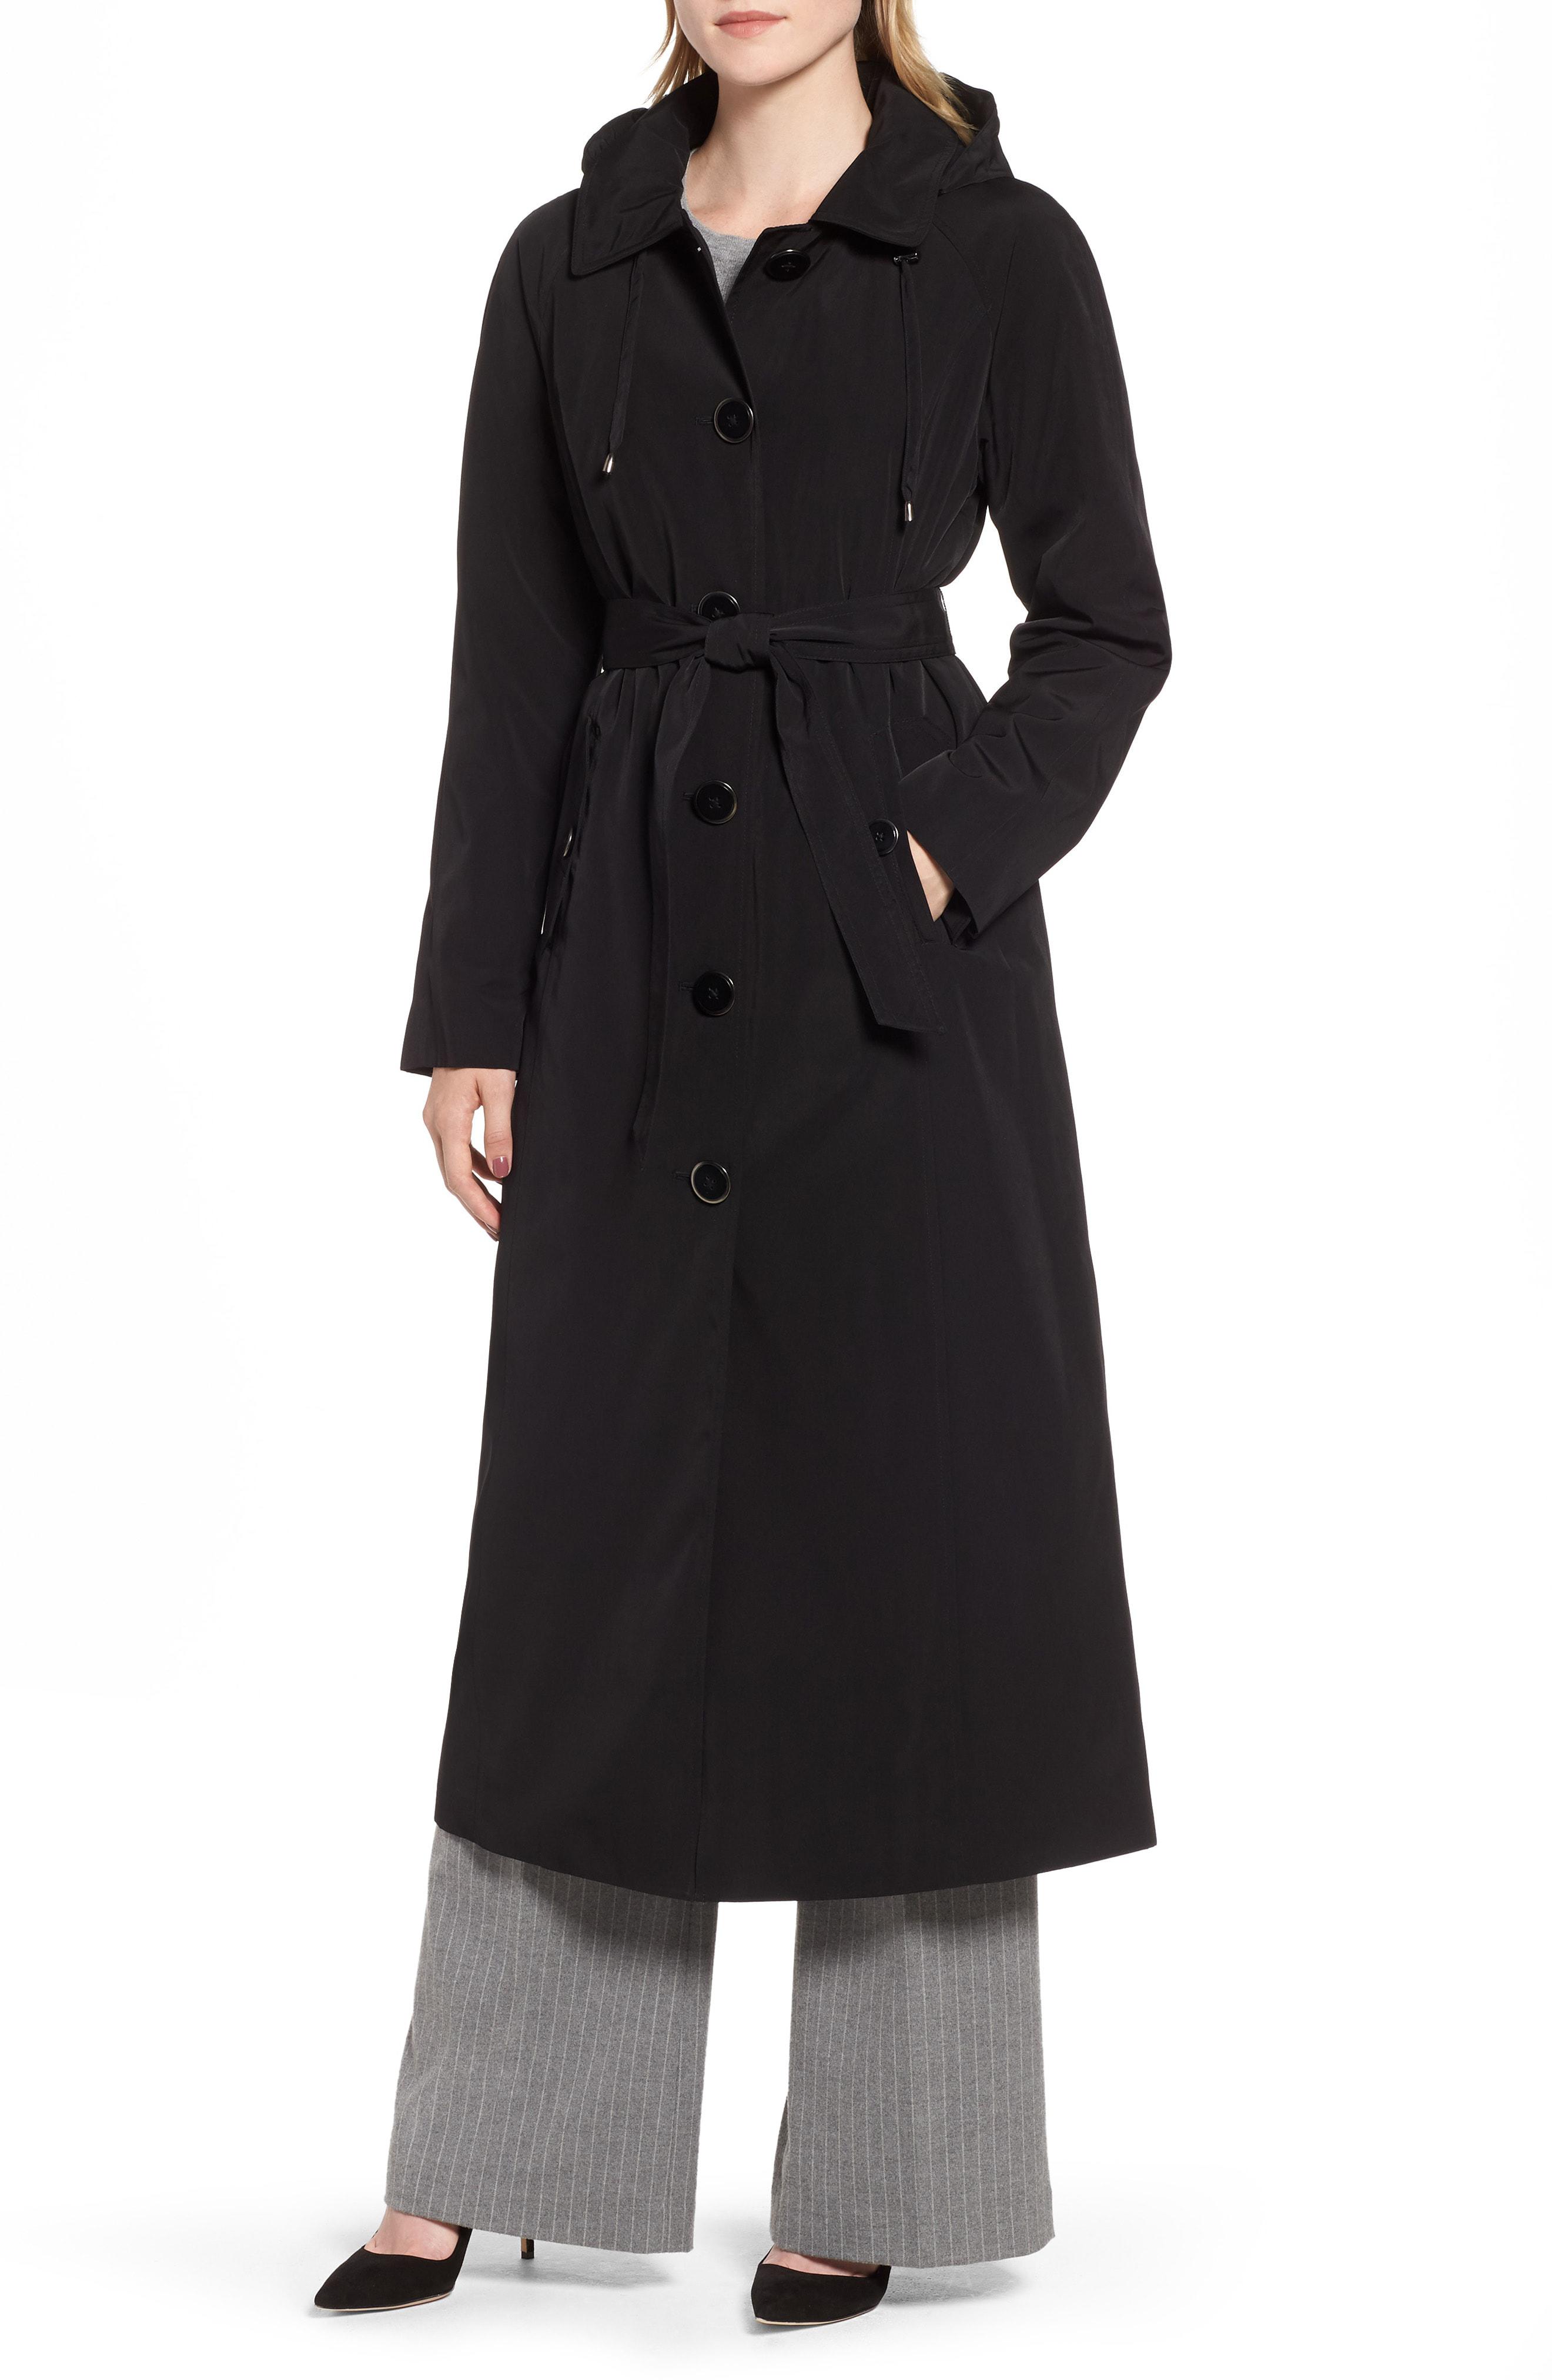 Lyst - London Fog Long Trench Coat With Detachable Hood & Liner in Black